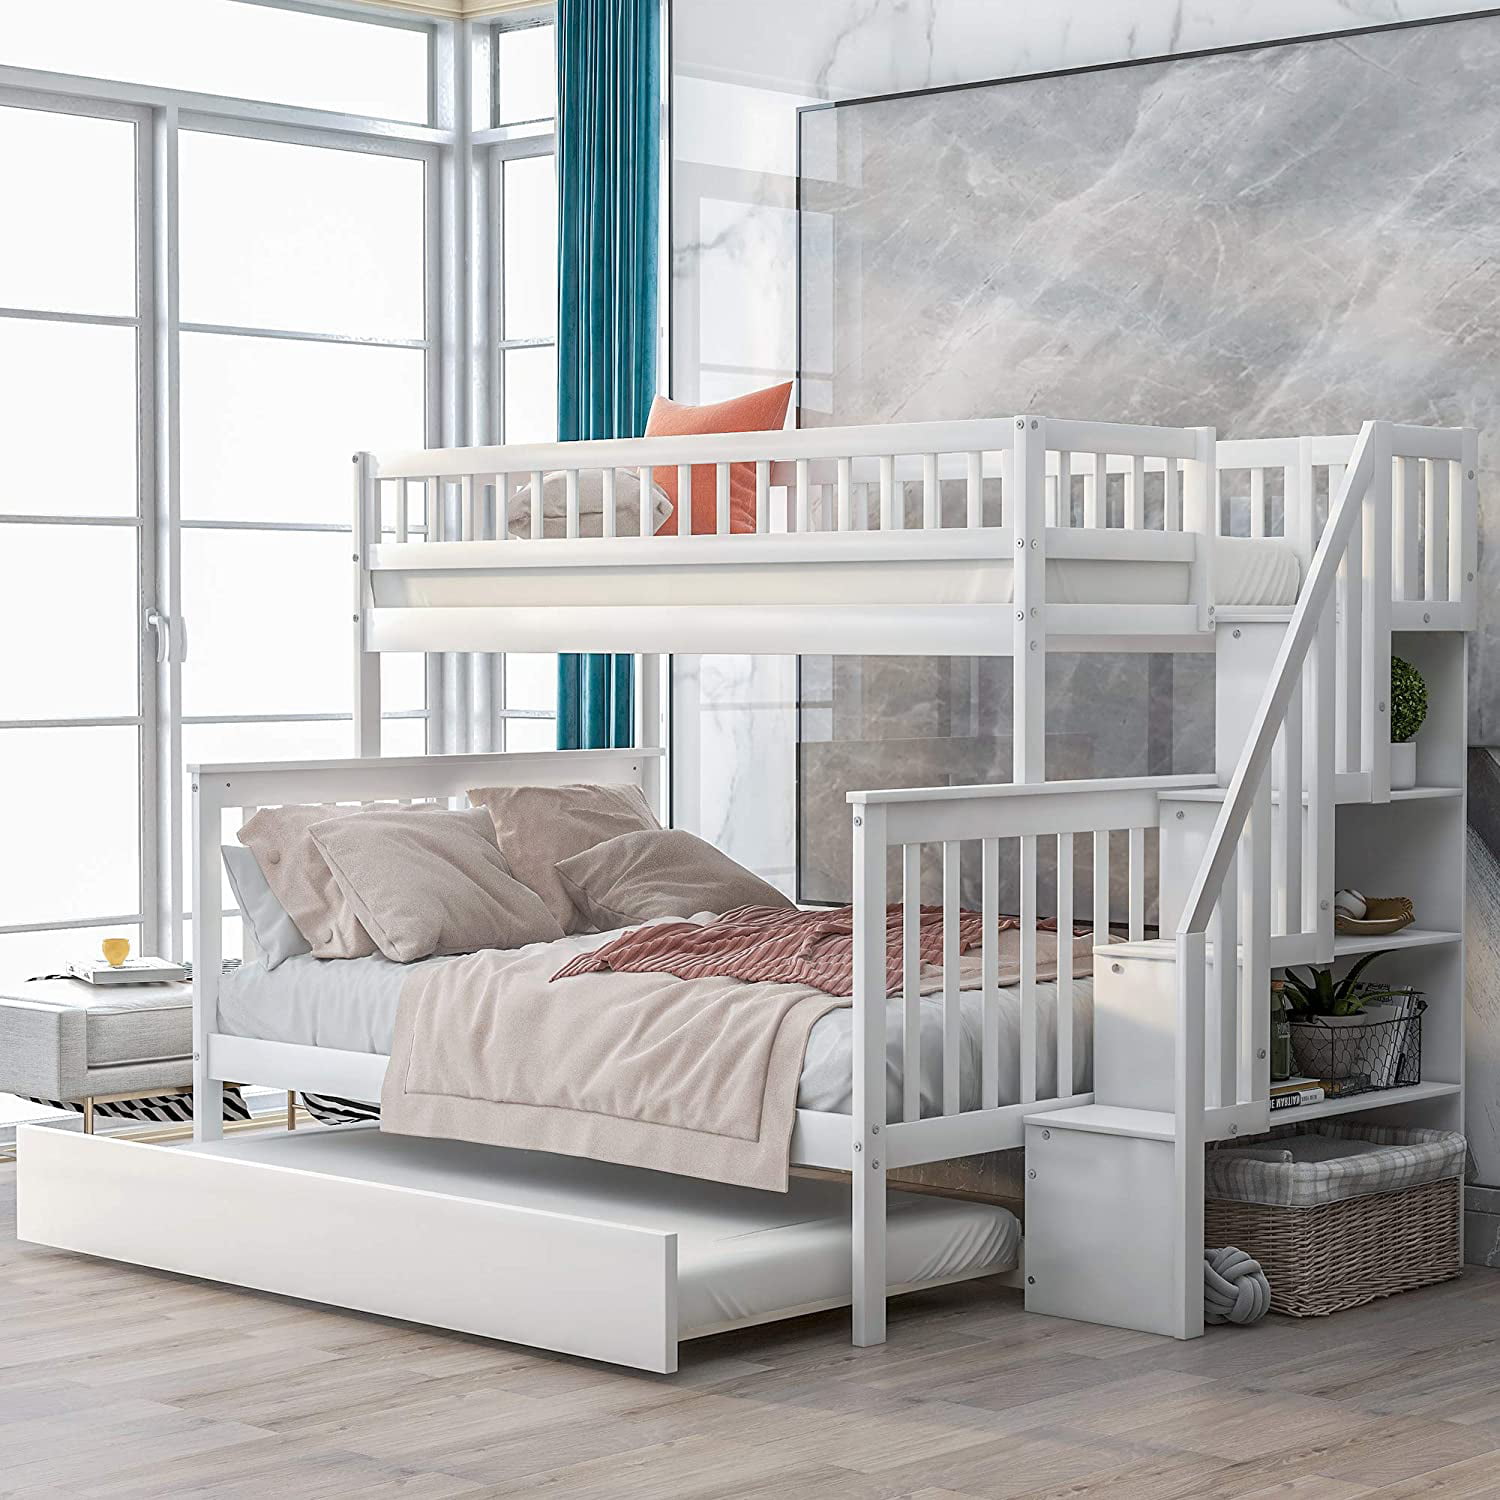 Piscis Bunk Bed Beds Twin Over, Trundle Bunk Beds With Stairs